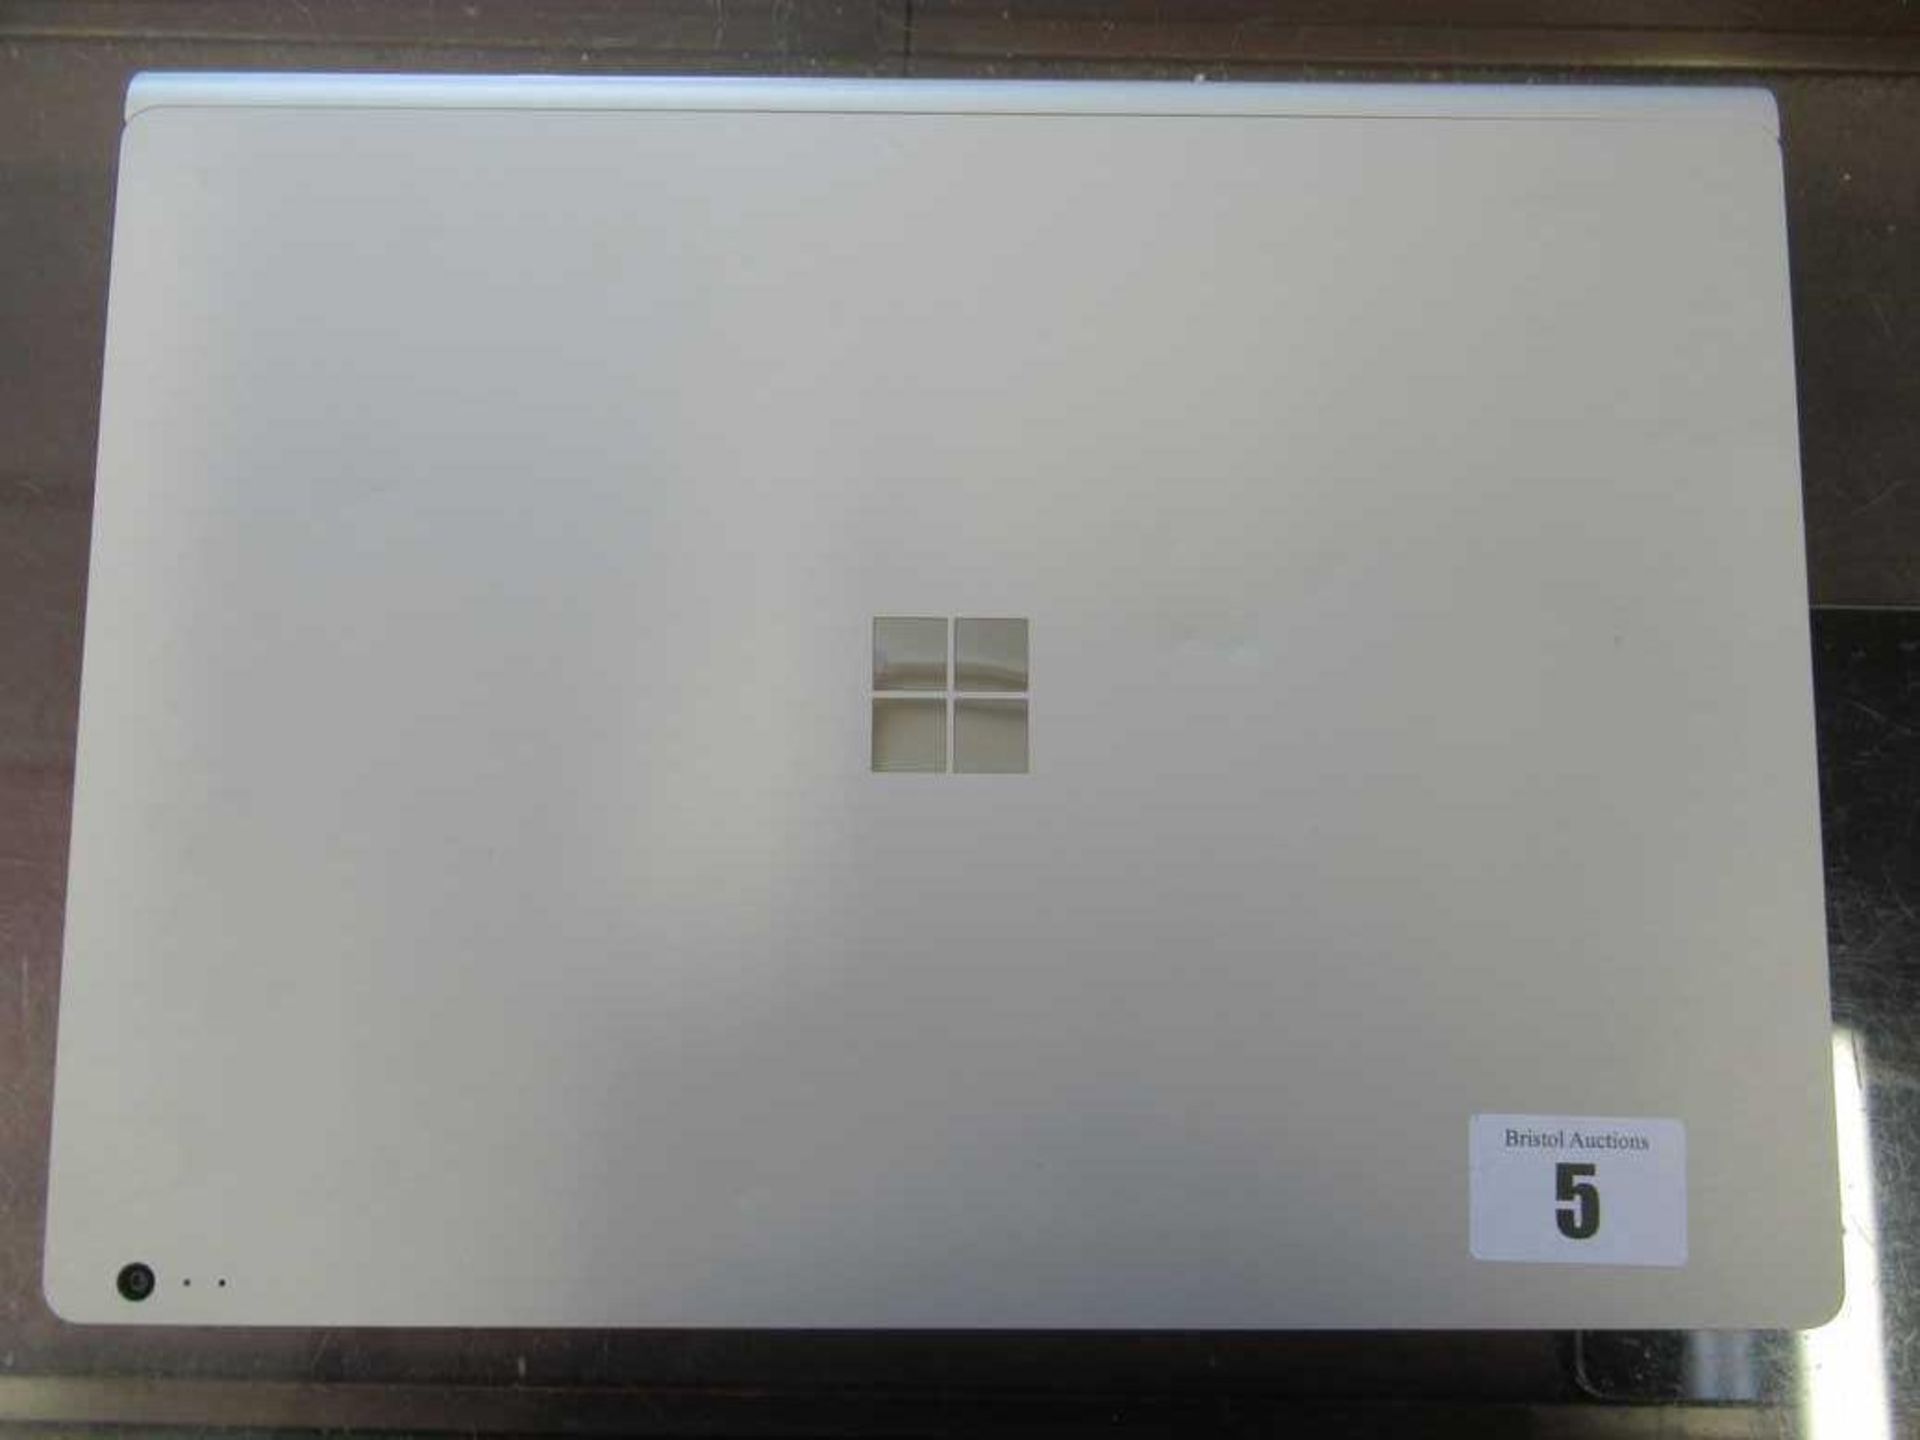 A pre-owned Microsoft Surface Book 2 13.5" Touchscreen Laptop in Silver with Intel i5-7300U - Image 3 of 12